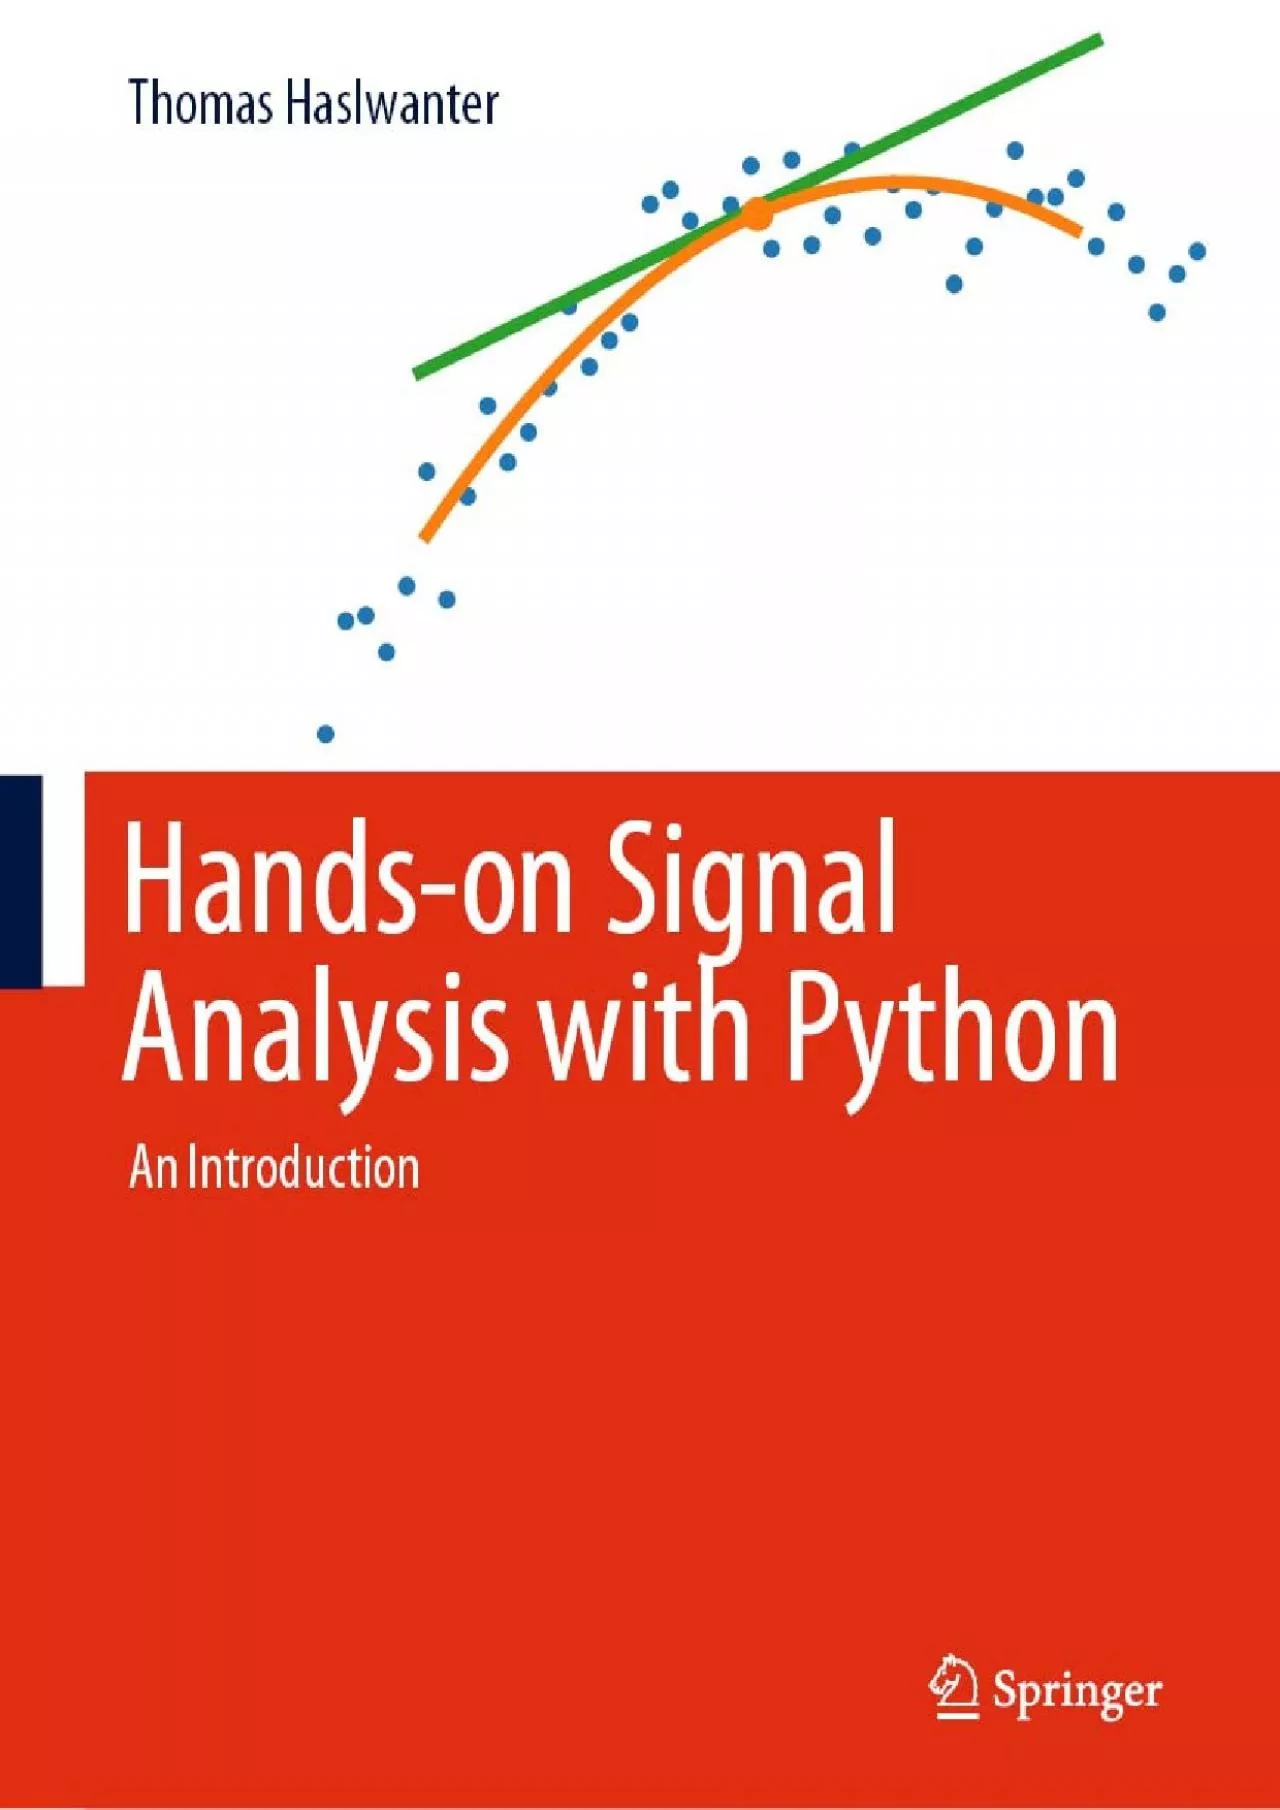 [FREE]-Hands-on Signal Analysis with Python: An Introduction